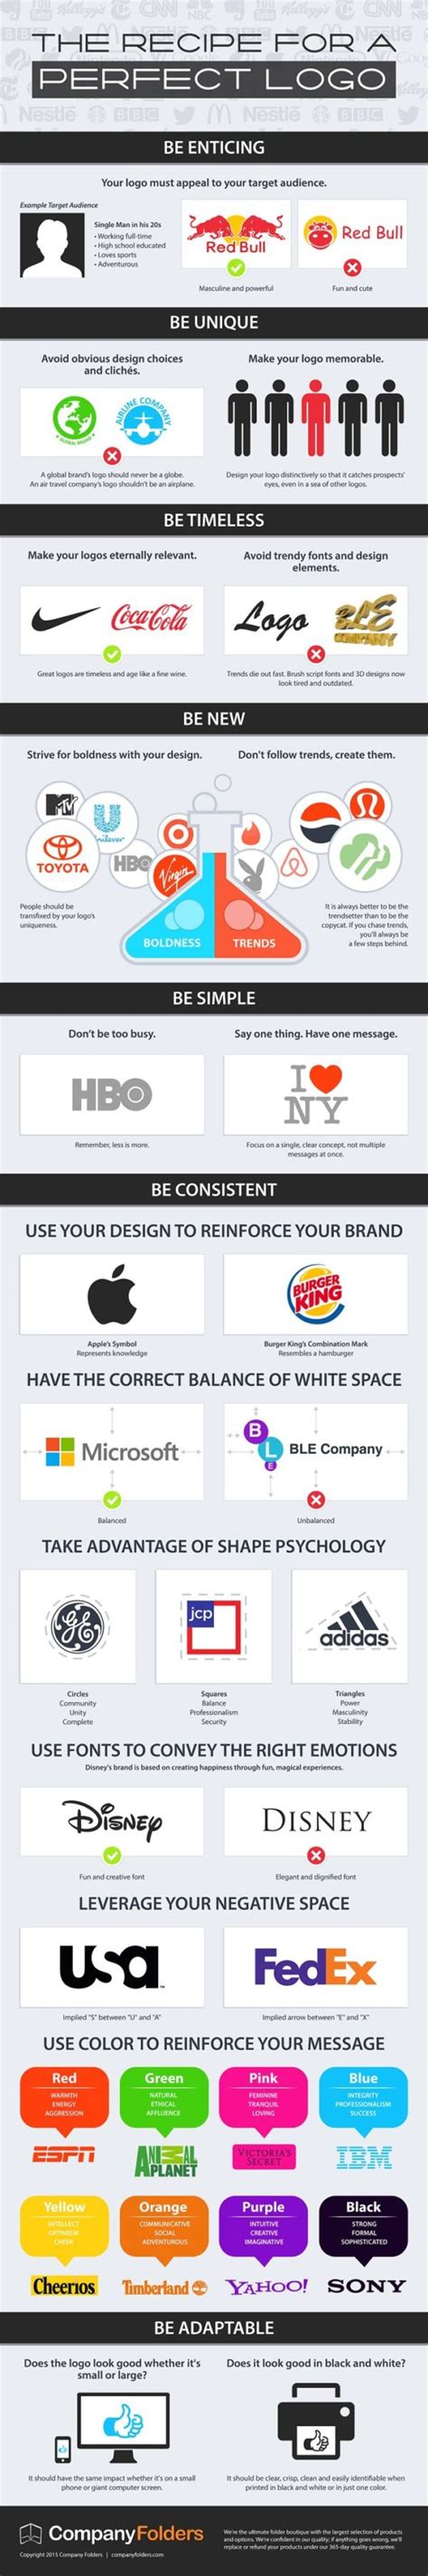 How To Design The Perfect Business Logo Infographic Justin T Farrell